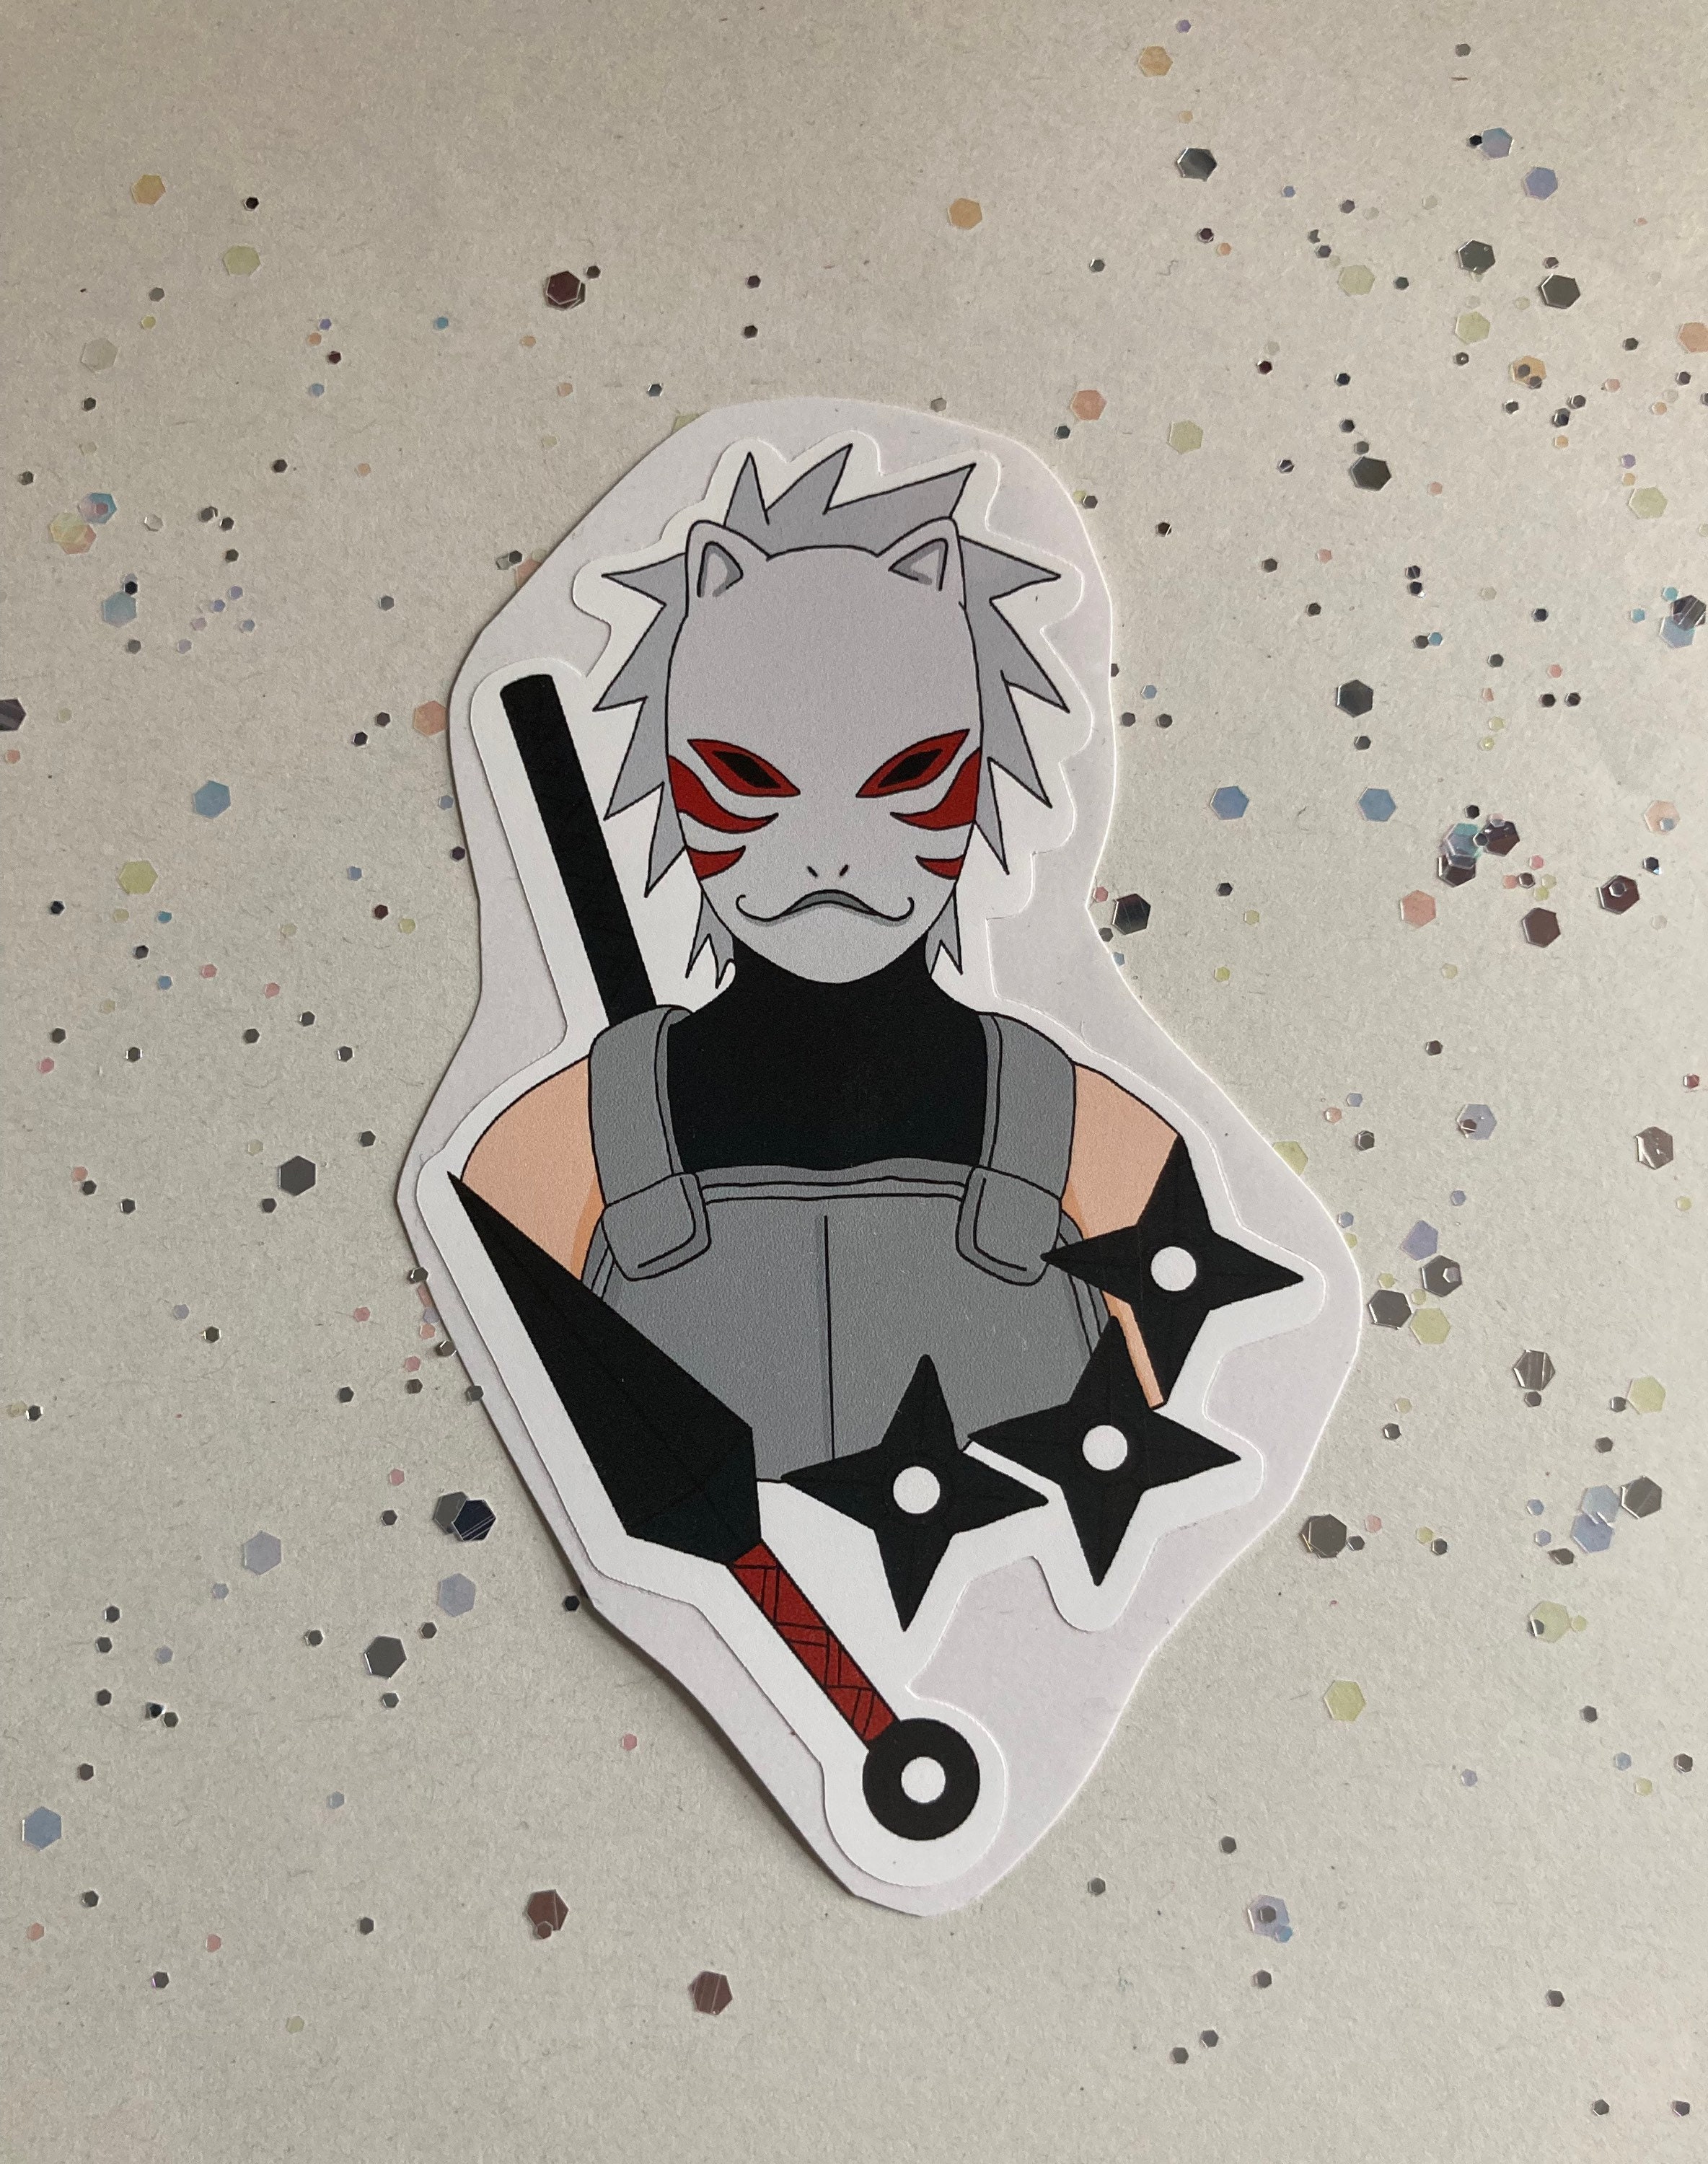 Gaara svg and png files for cricut machine , anime svg , man - Inspire  Uplift